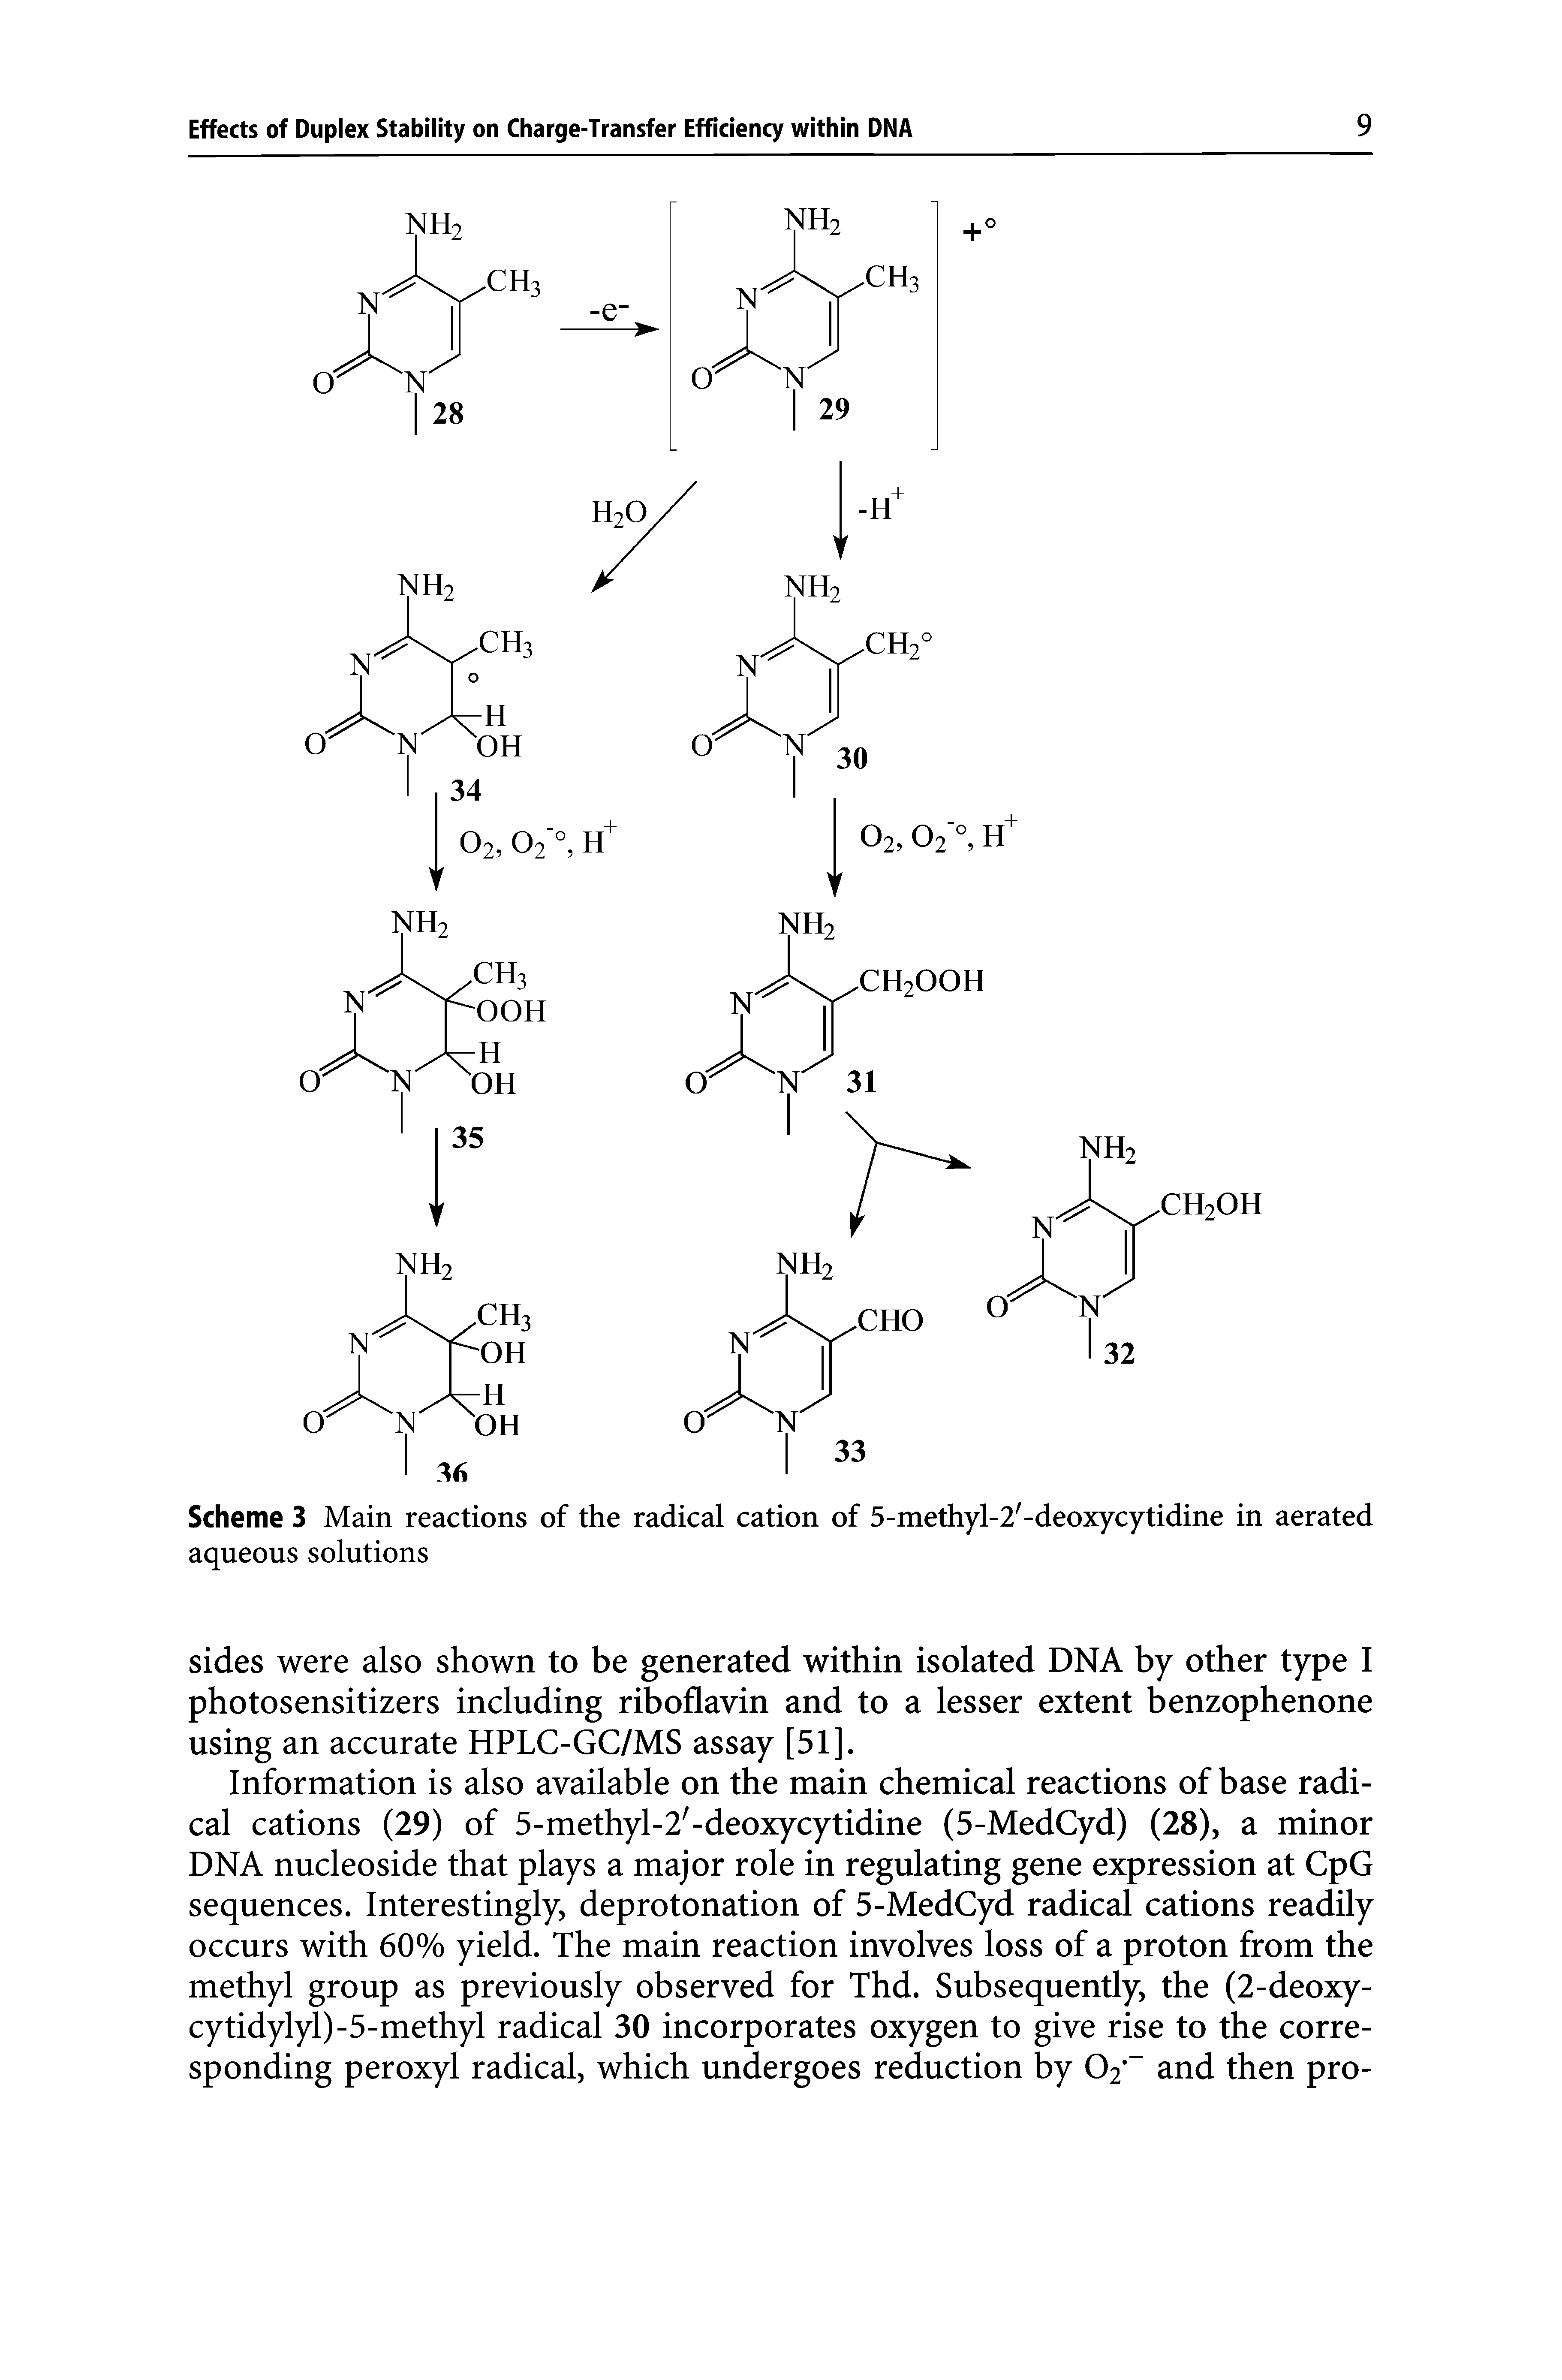 Scheme 3 Main reactions of the radical cation of 5-methyl-2 -deoxycytidine in aerated aqueous solutions...